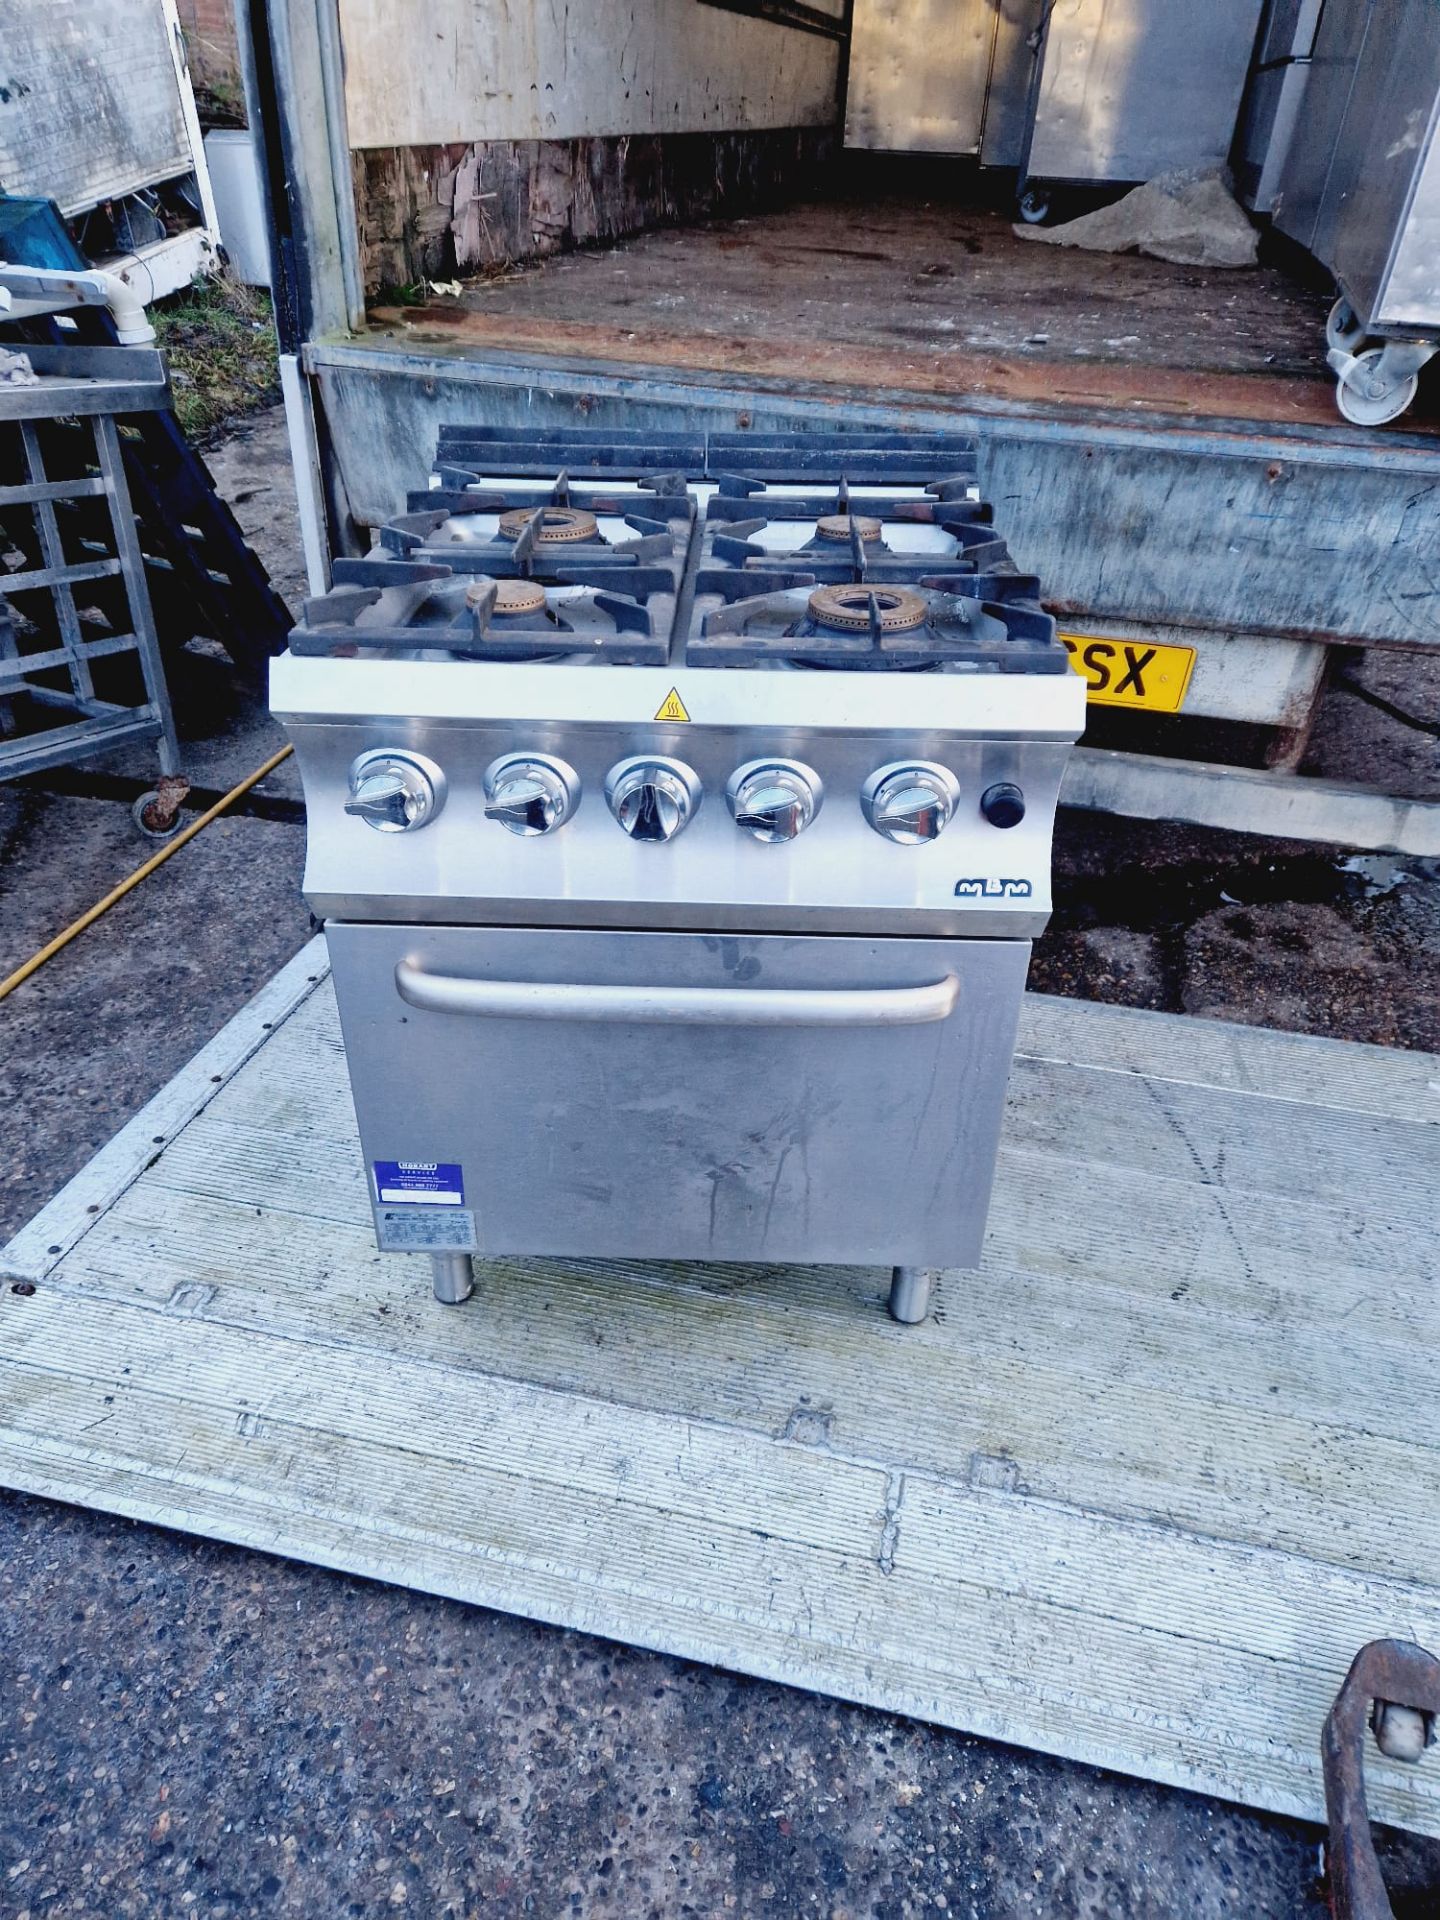 4 BURNER NATURAL GAS COOKER WITH OVEN ALMOST NEW CONDITION - WORKING AND SERVICED 